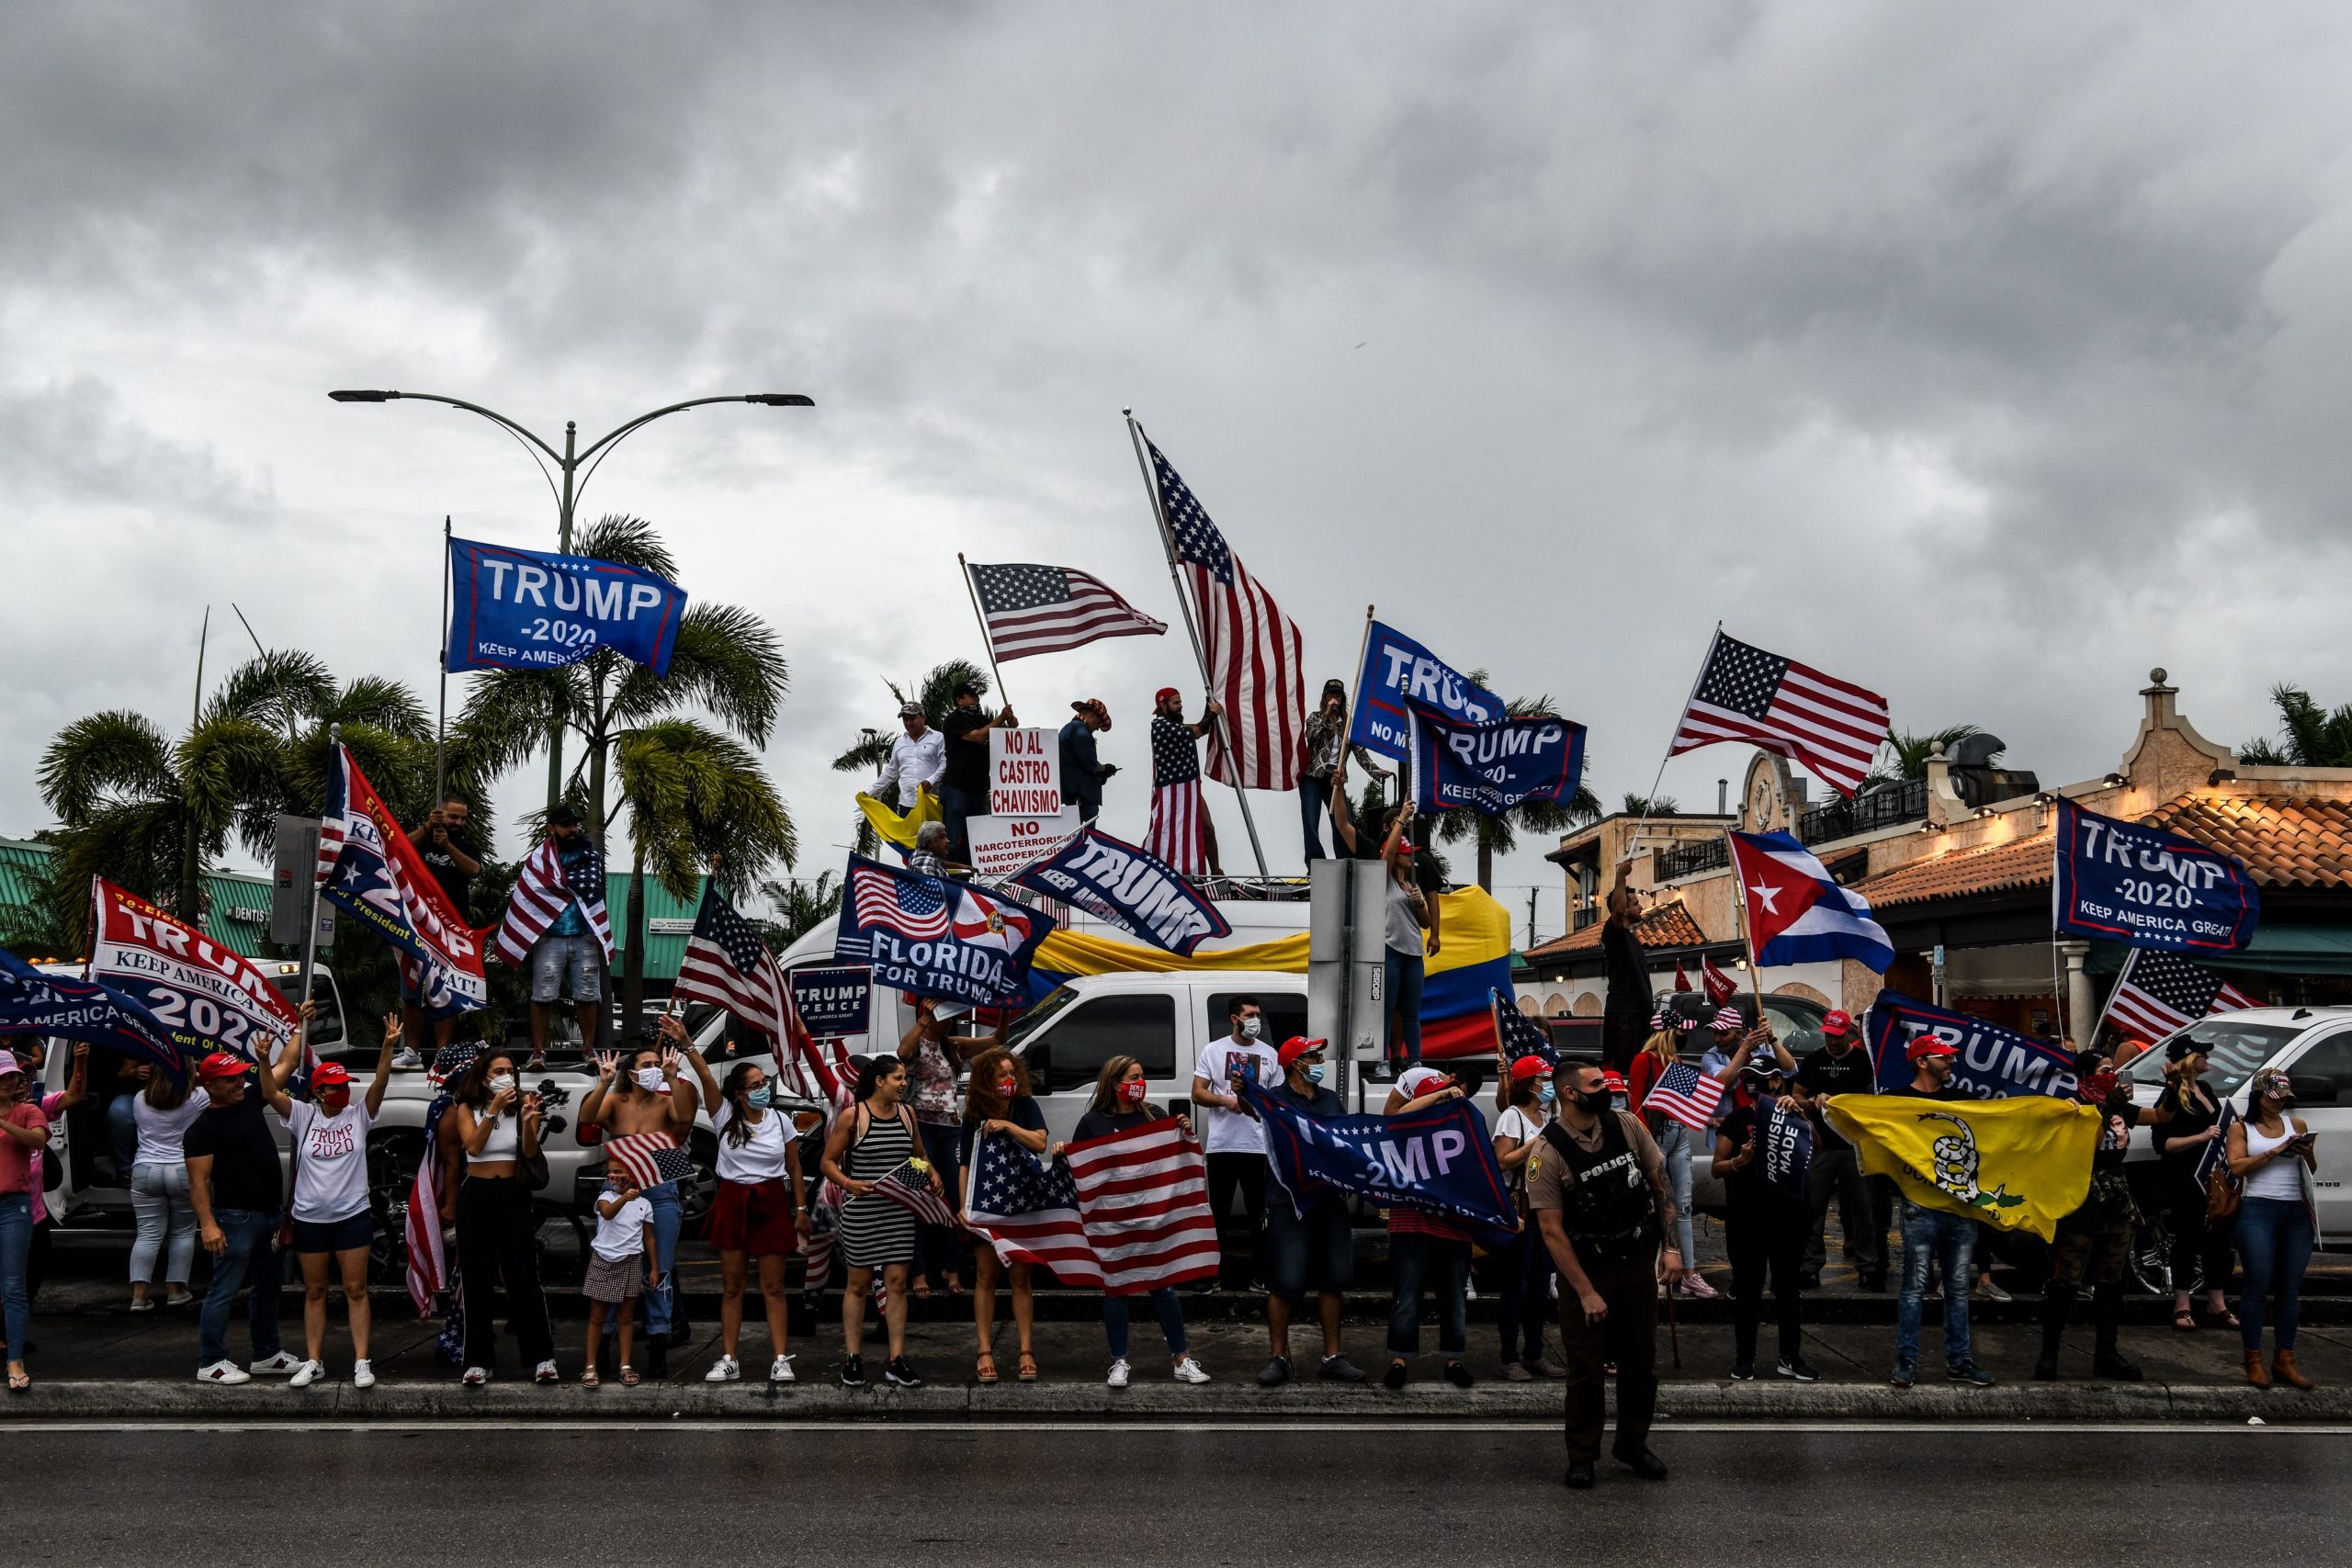 Supporters of US President Donald Trump hold signs and flags during a protest in Miami on November 7, 2020, after Joe Biden was declared the winner of the 2020 presidential election. - Democrat Joe Biden has won the White House, US media said November 7, defeating Donald Trump and ending a presidency that convulsed American politics, shocked the world and left the United States more divided than at any time in decades. (Photo by CHANDAN KHANNA / AFP) (Photo by CHANDAN KHANNA/AFP via Getty Images)